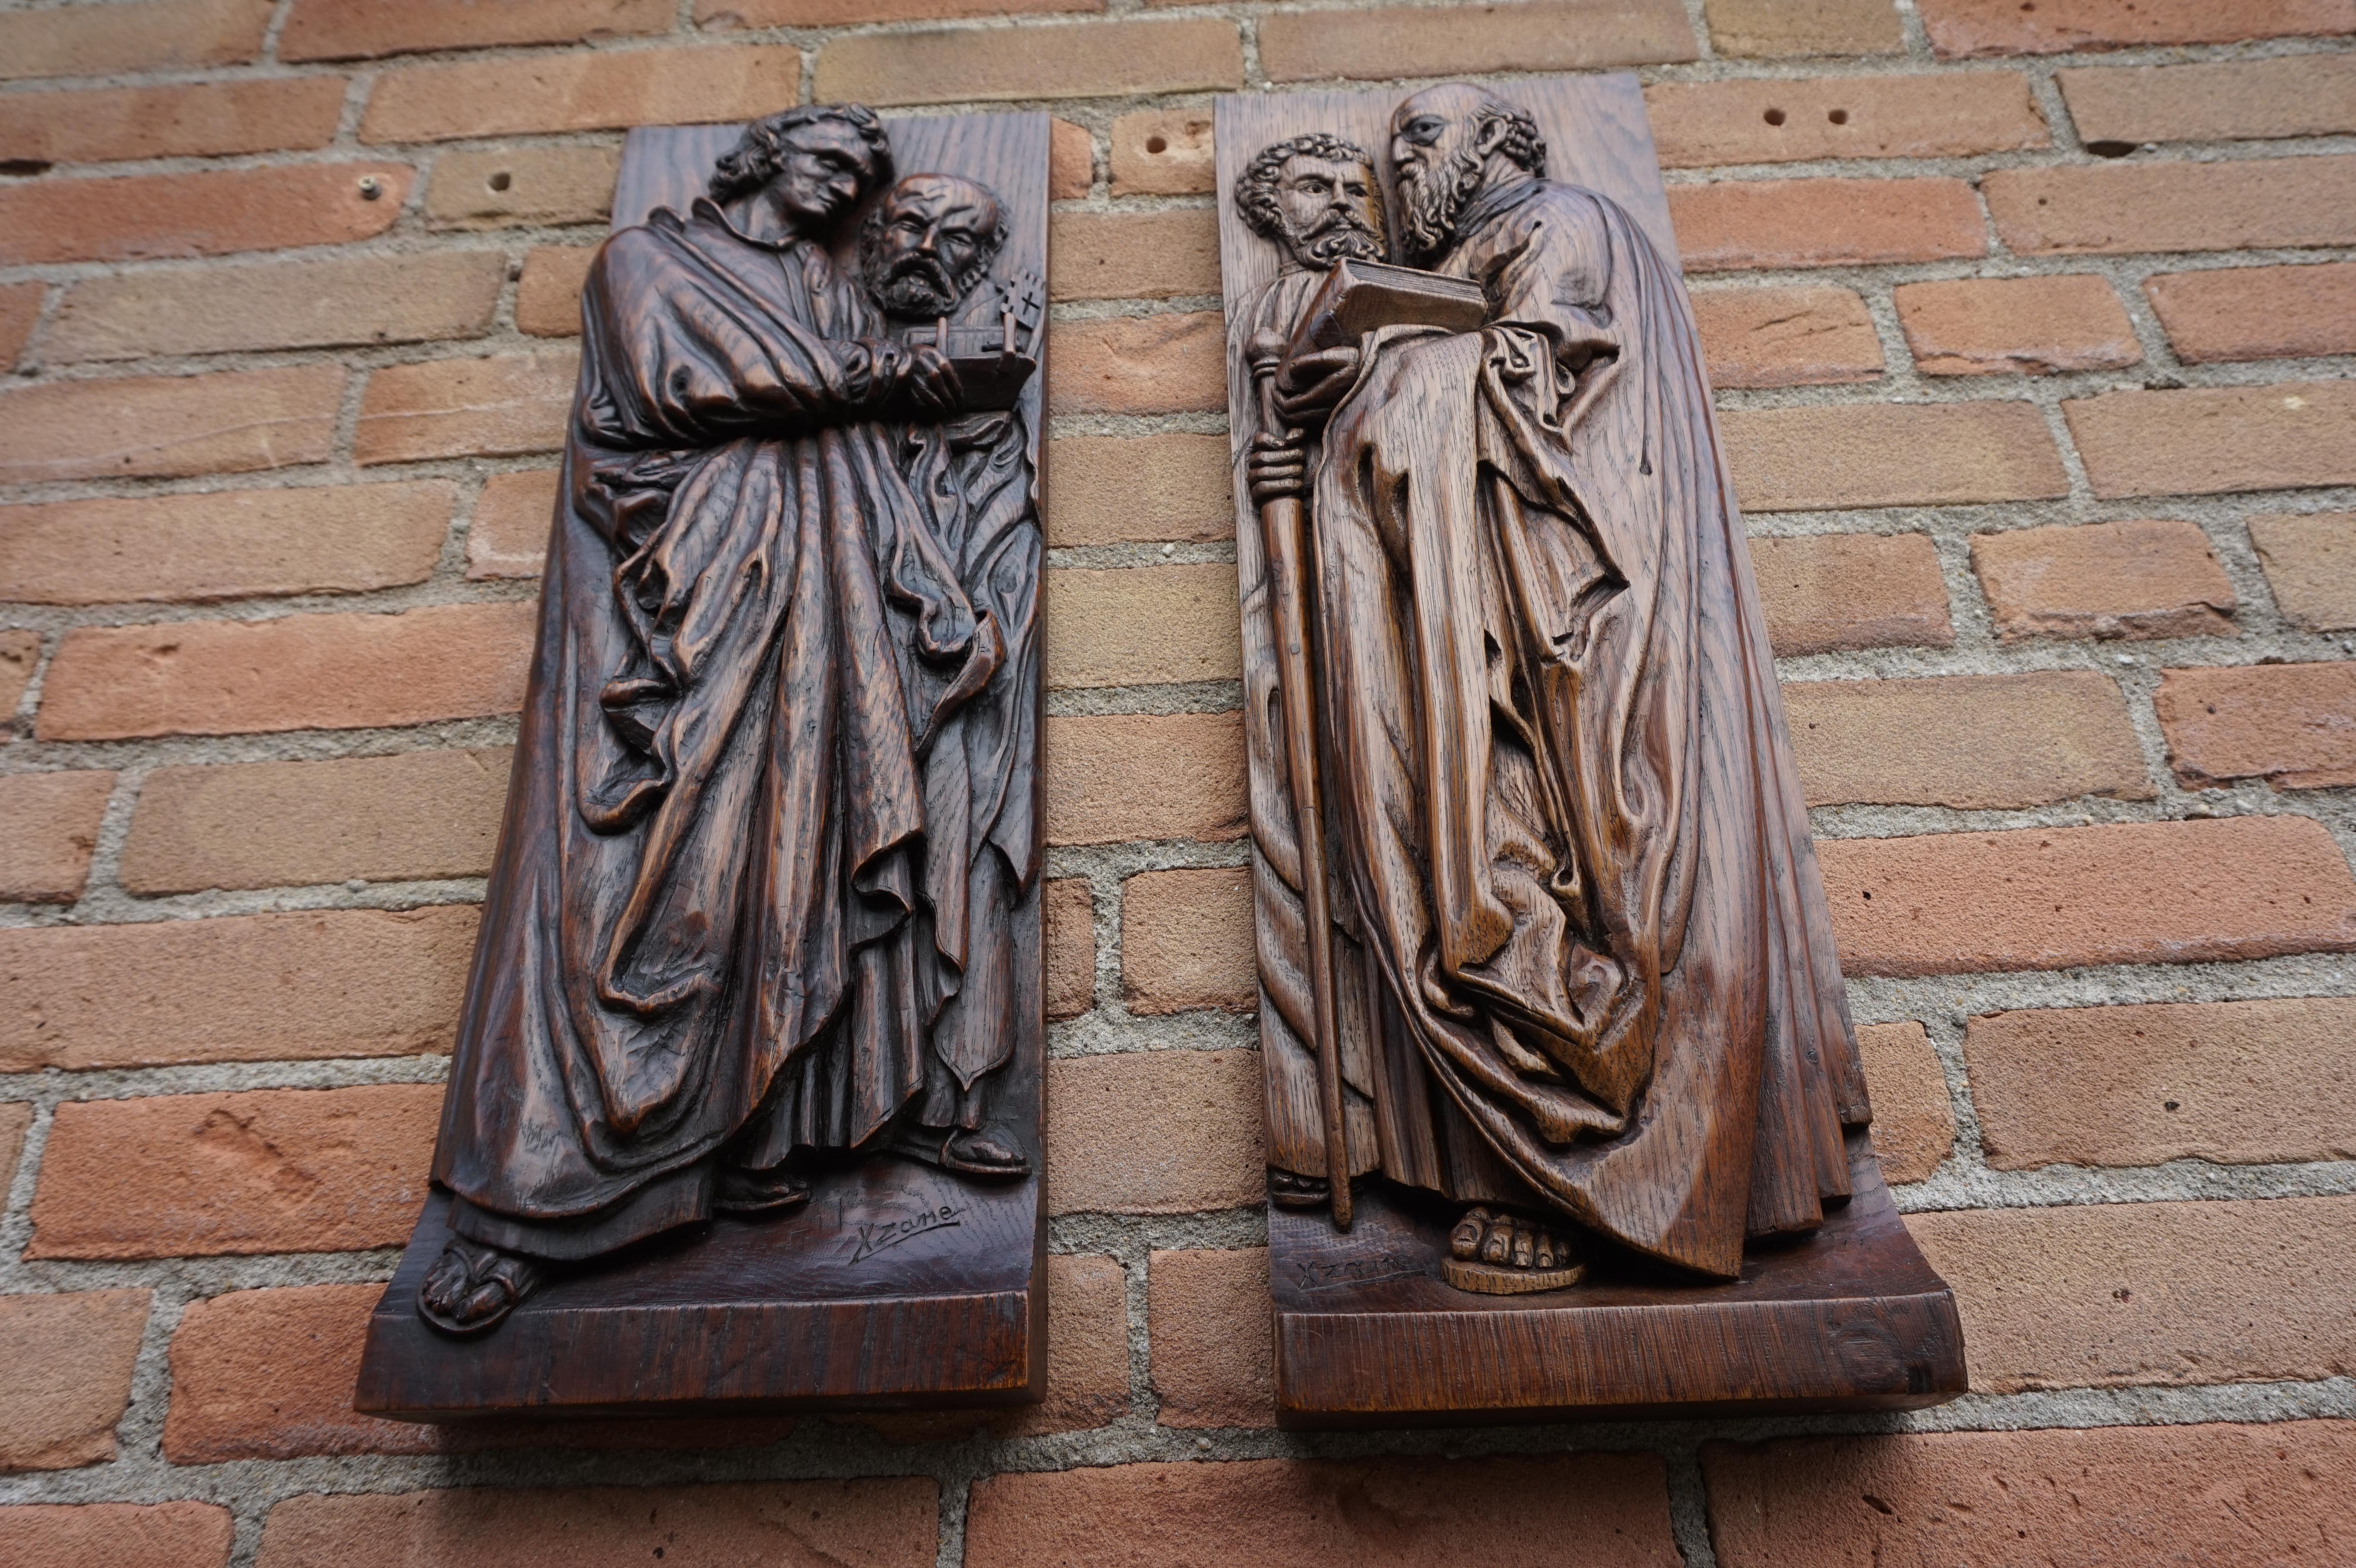 Deeply carved and signed antique oak wall plaques.

If you are looking for fair priced, antique religious art then this rare pair could be ideal for decorating your wall. All hand carved out of solid oakwood these apostels or clergyman are depicted